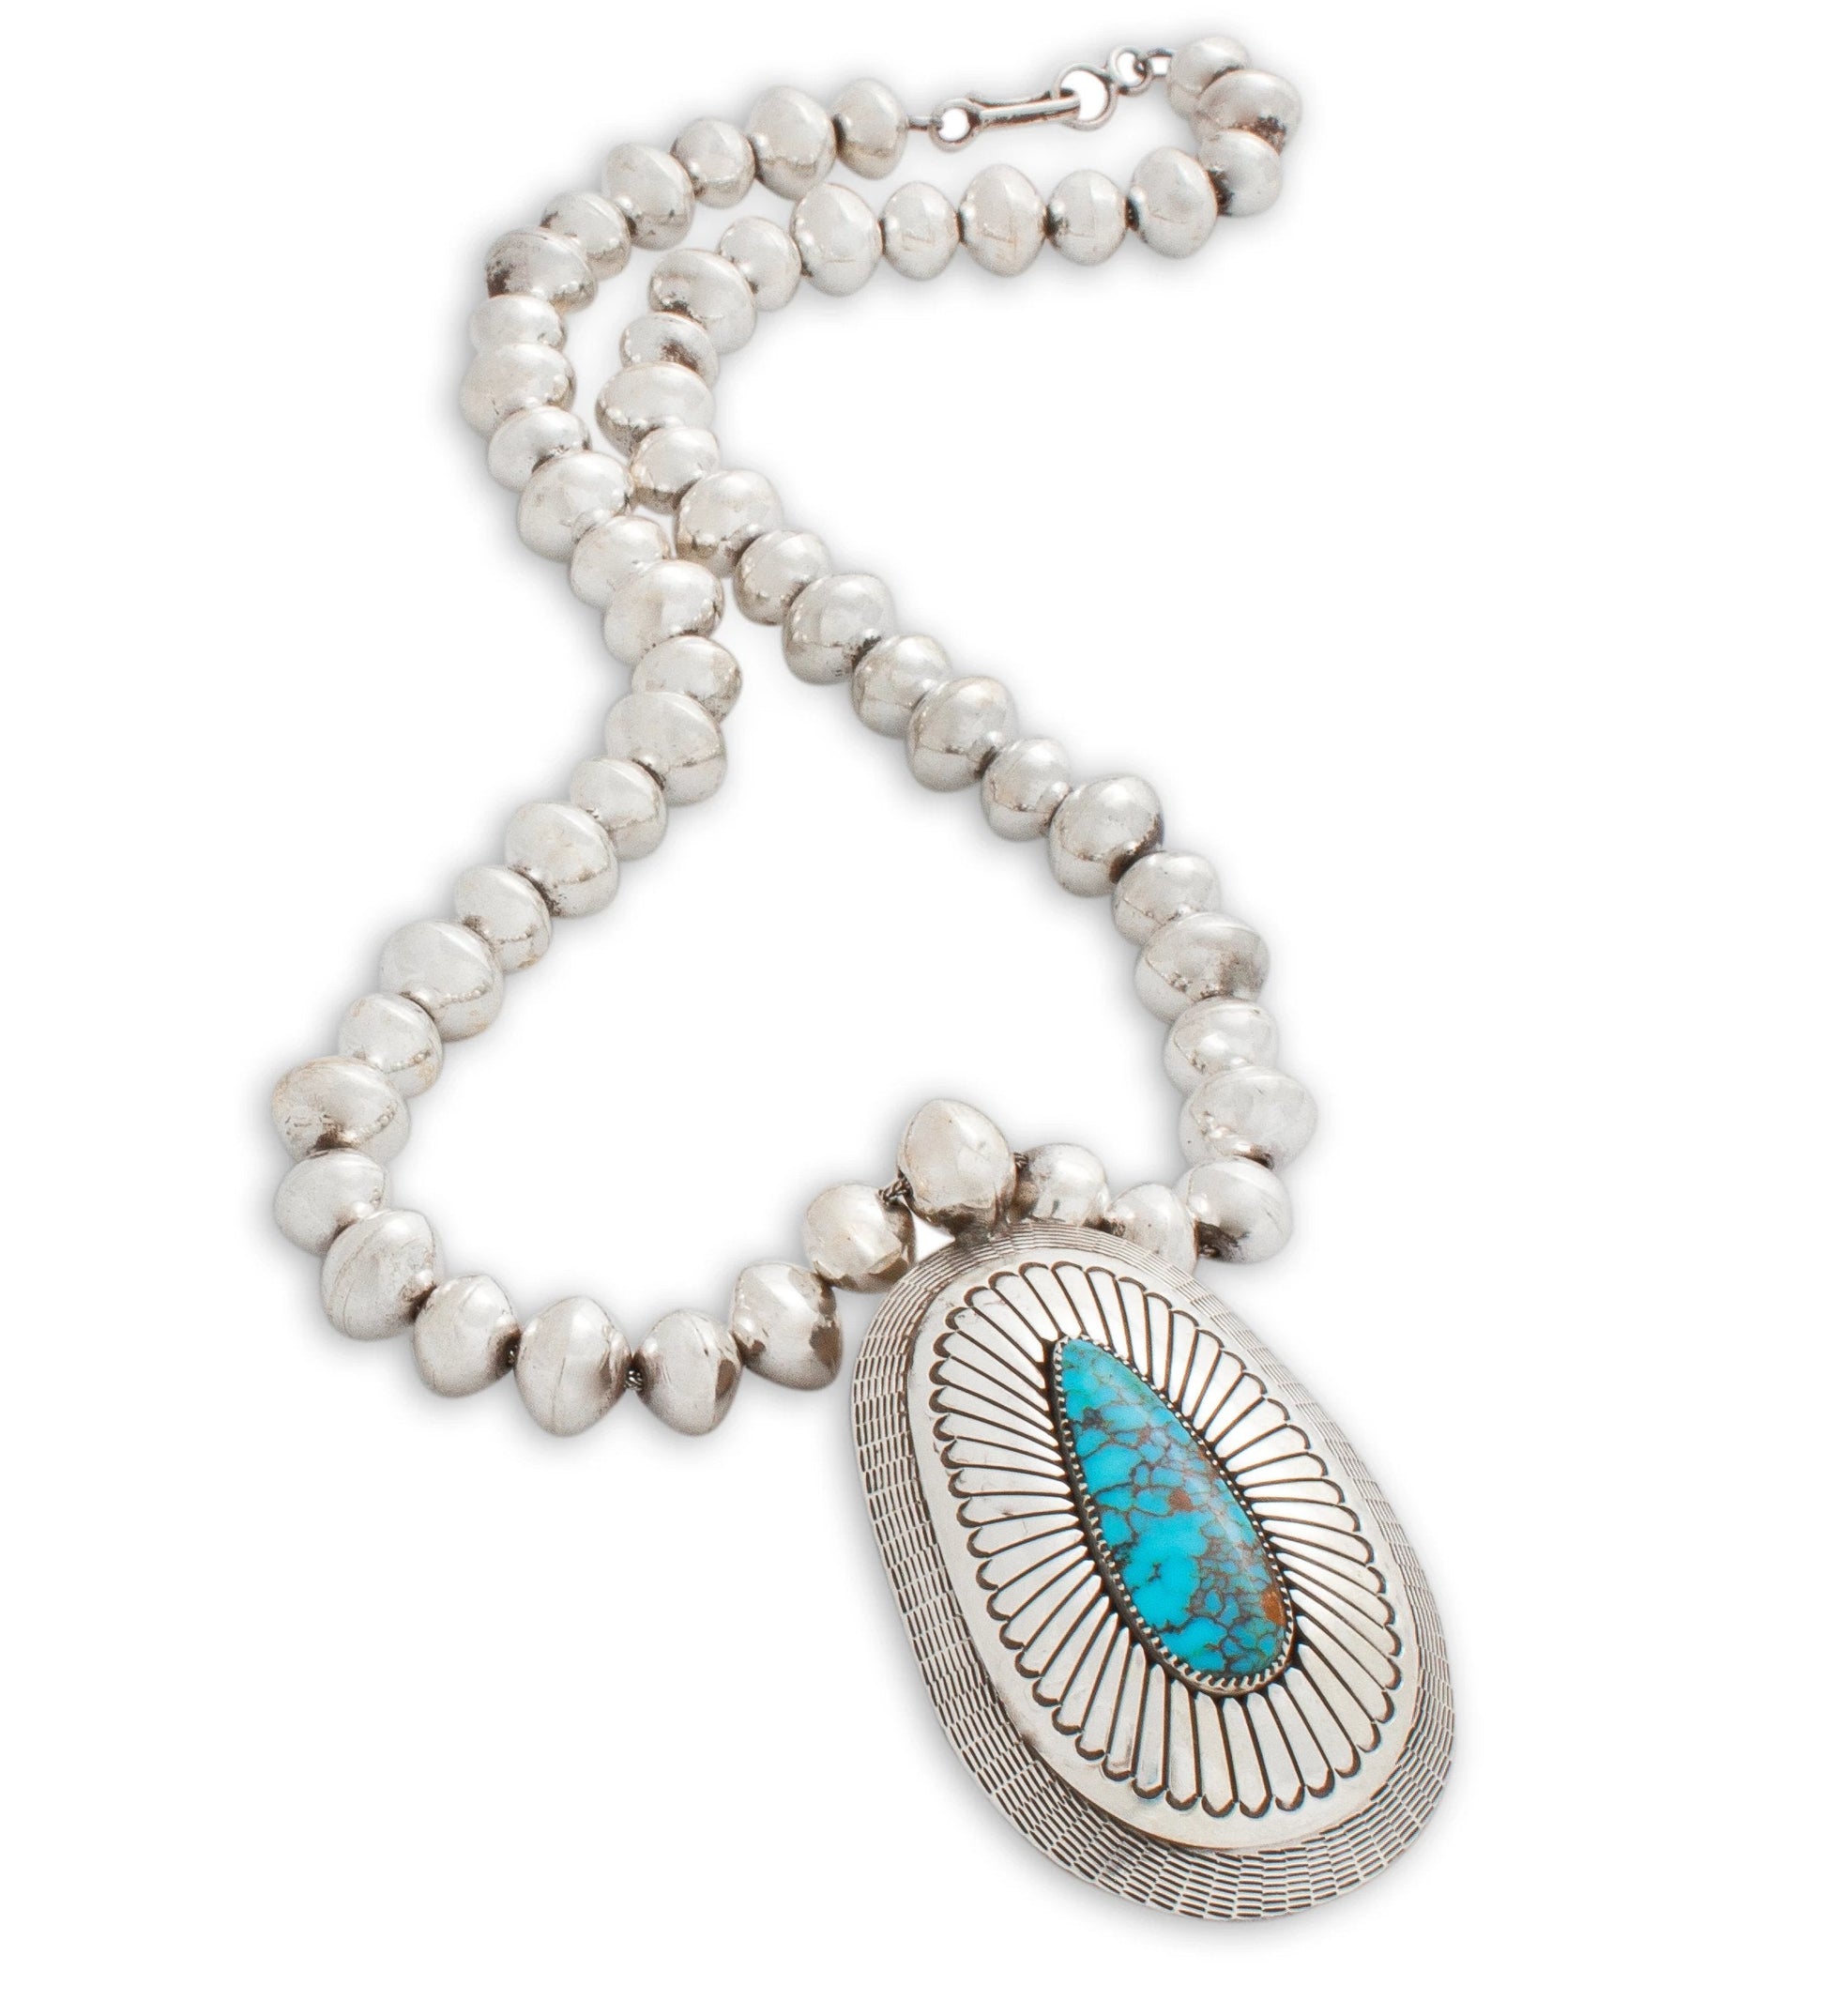 Lee Yazzie Necklace of Sterling Silver Beads and Turquoise Pendant - Turquoise & Tufa